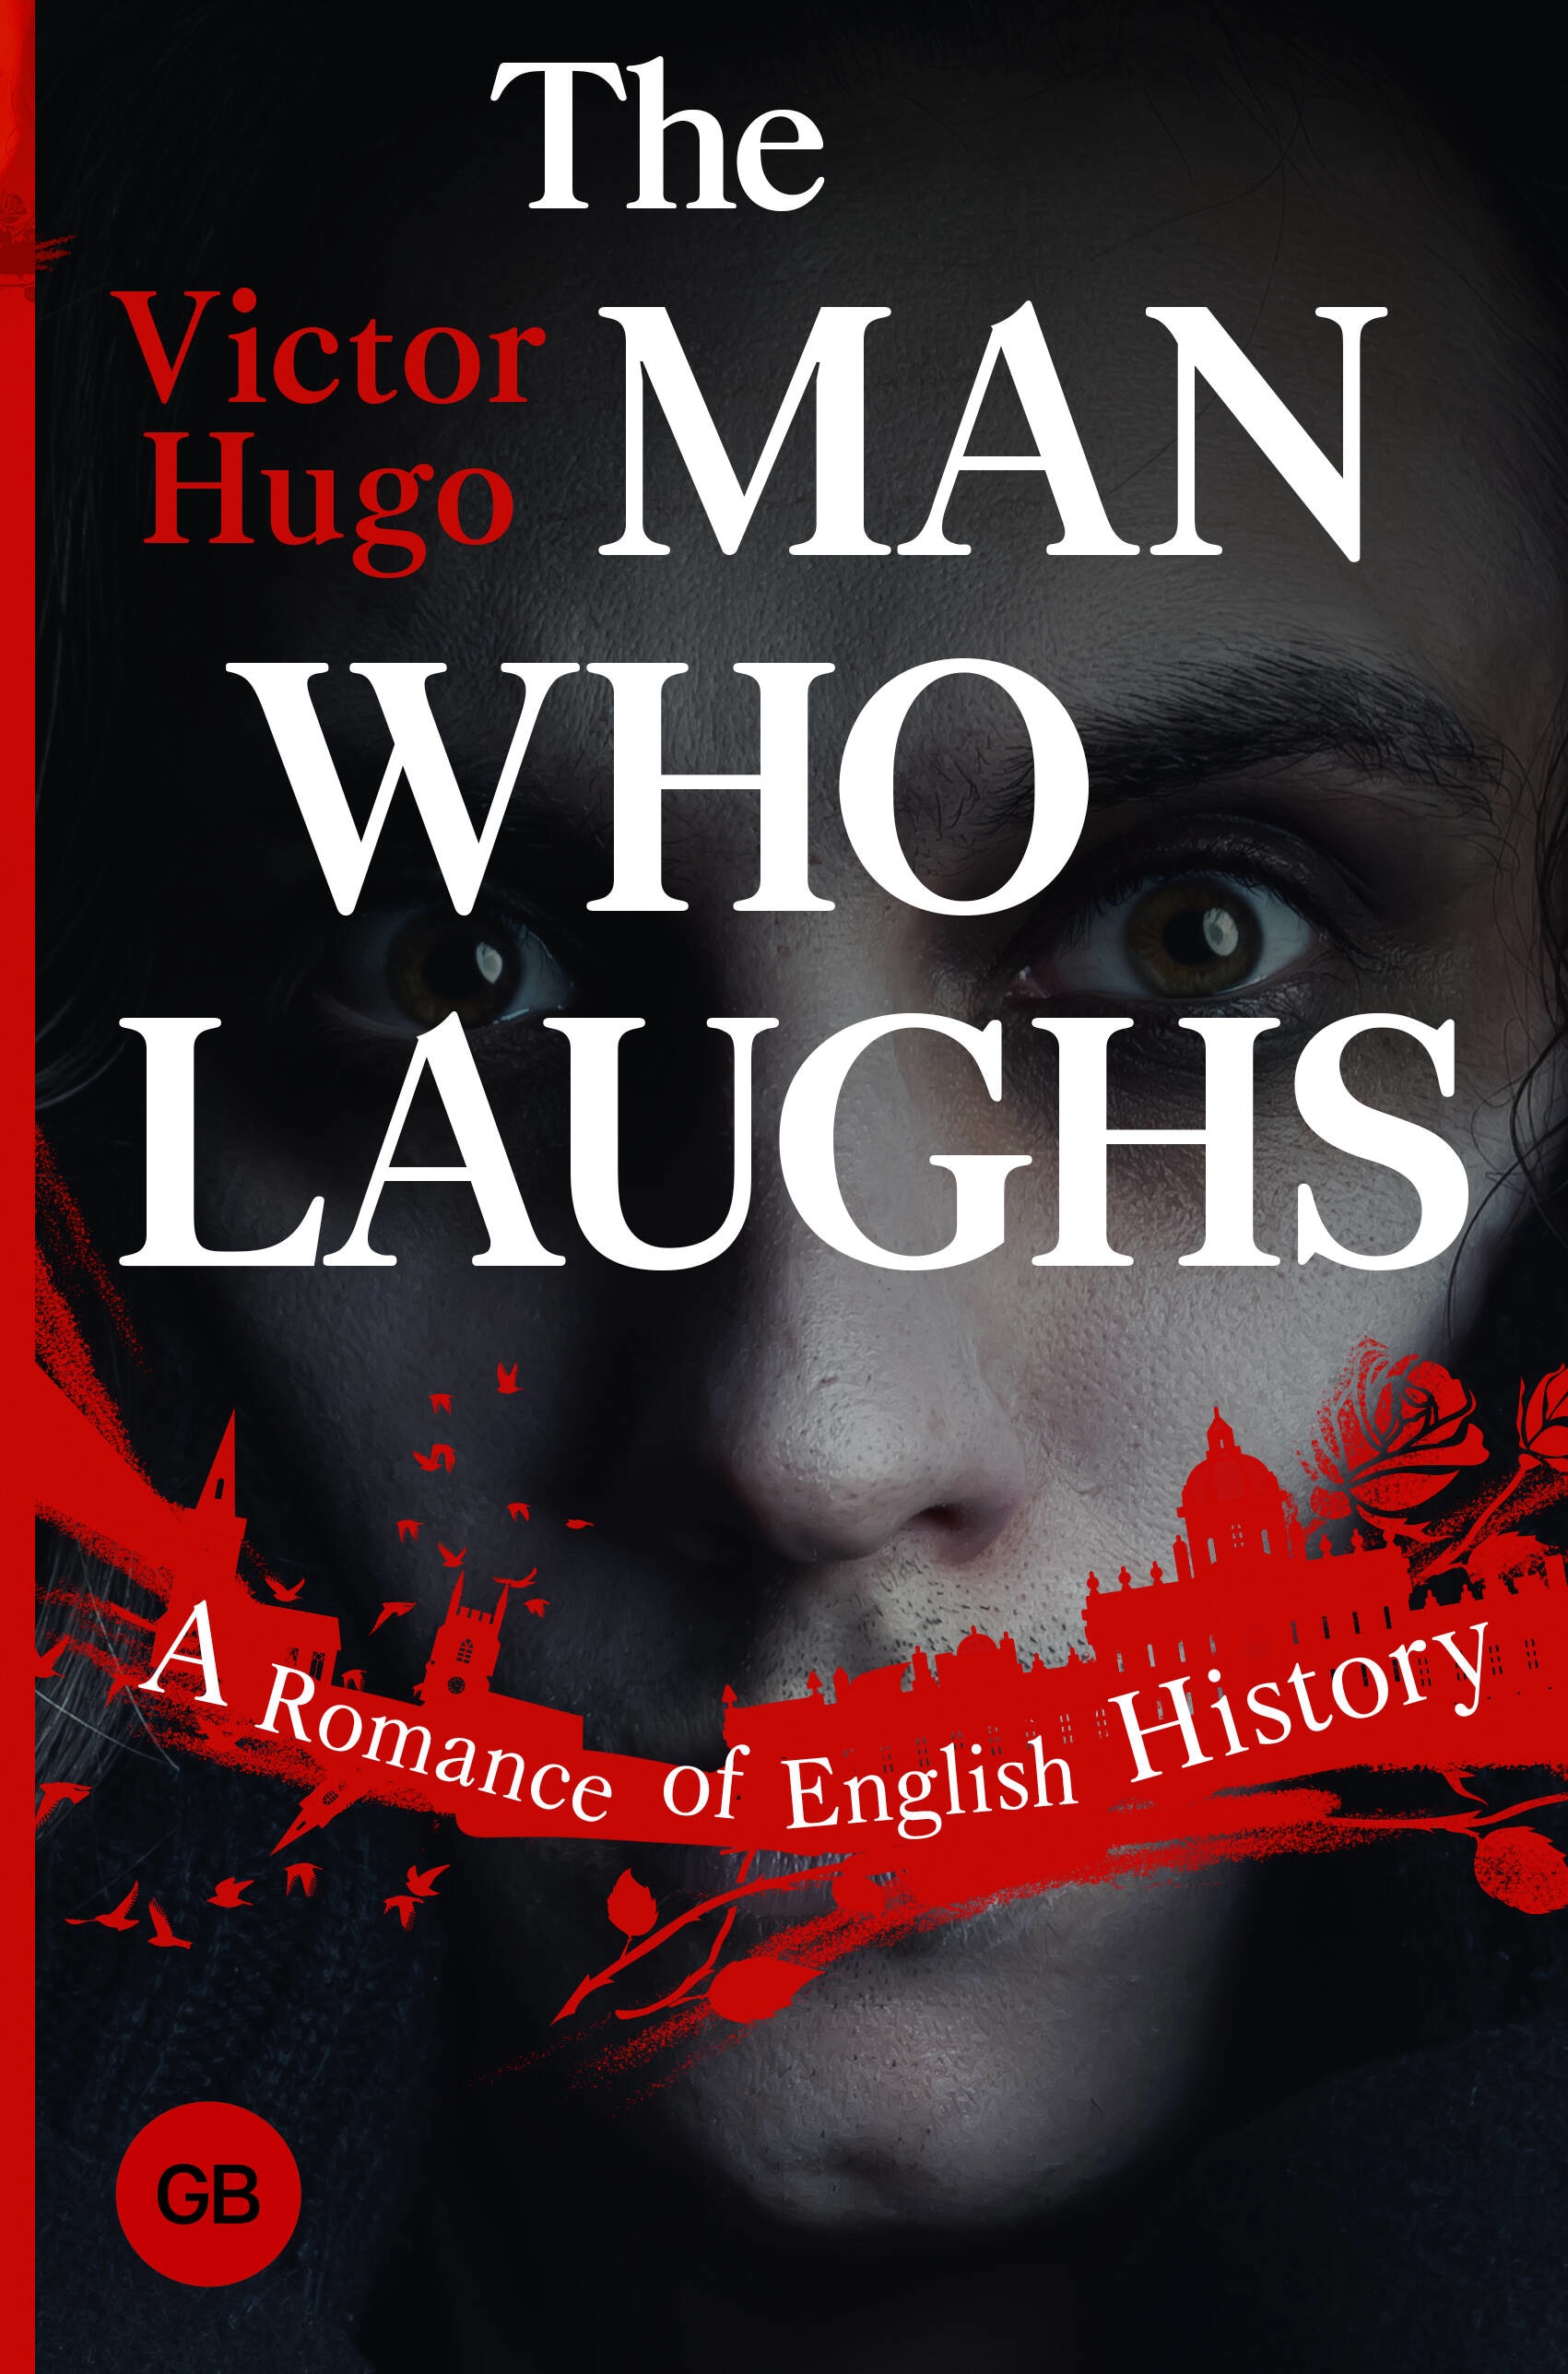 Book “The Man Who Laughs: A Romance of English History” by Виктор Гюго — 2023